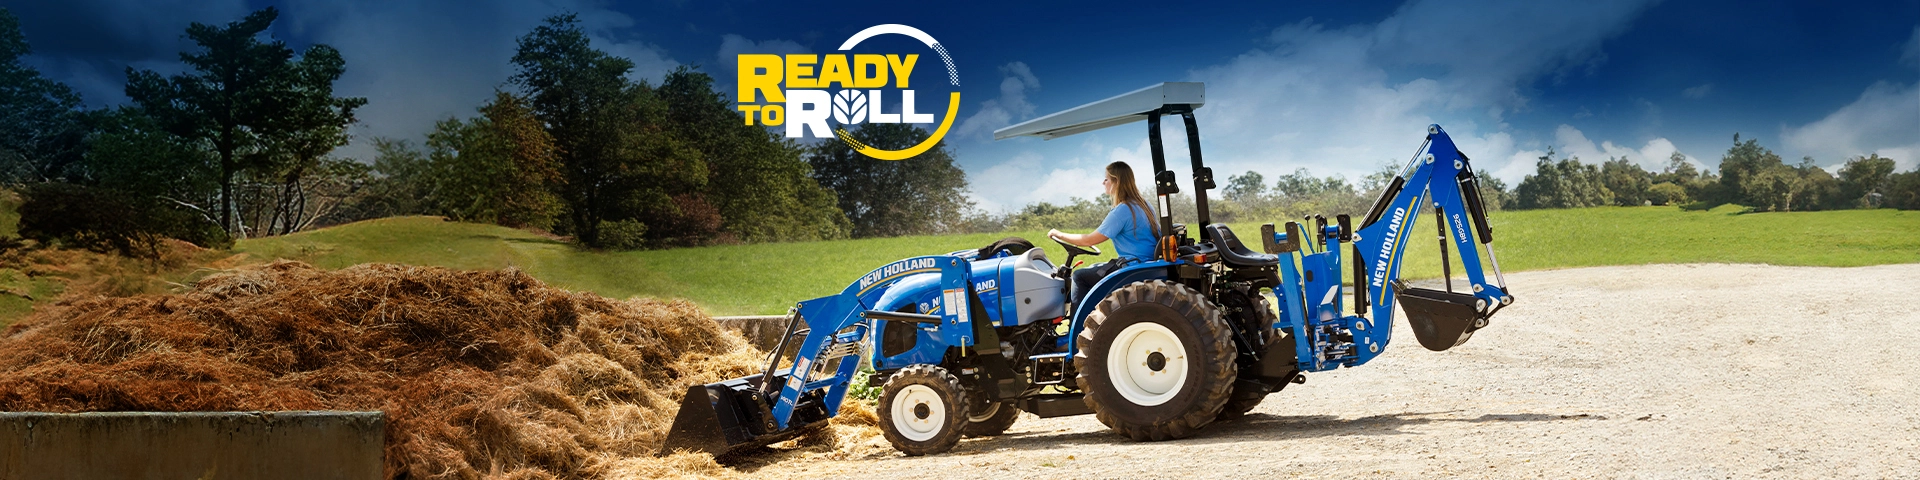 Special offers on New Holland compact tractors